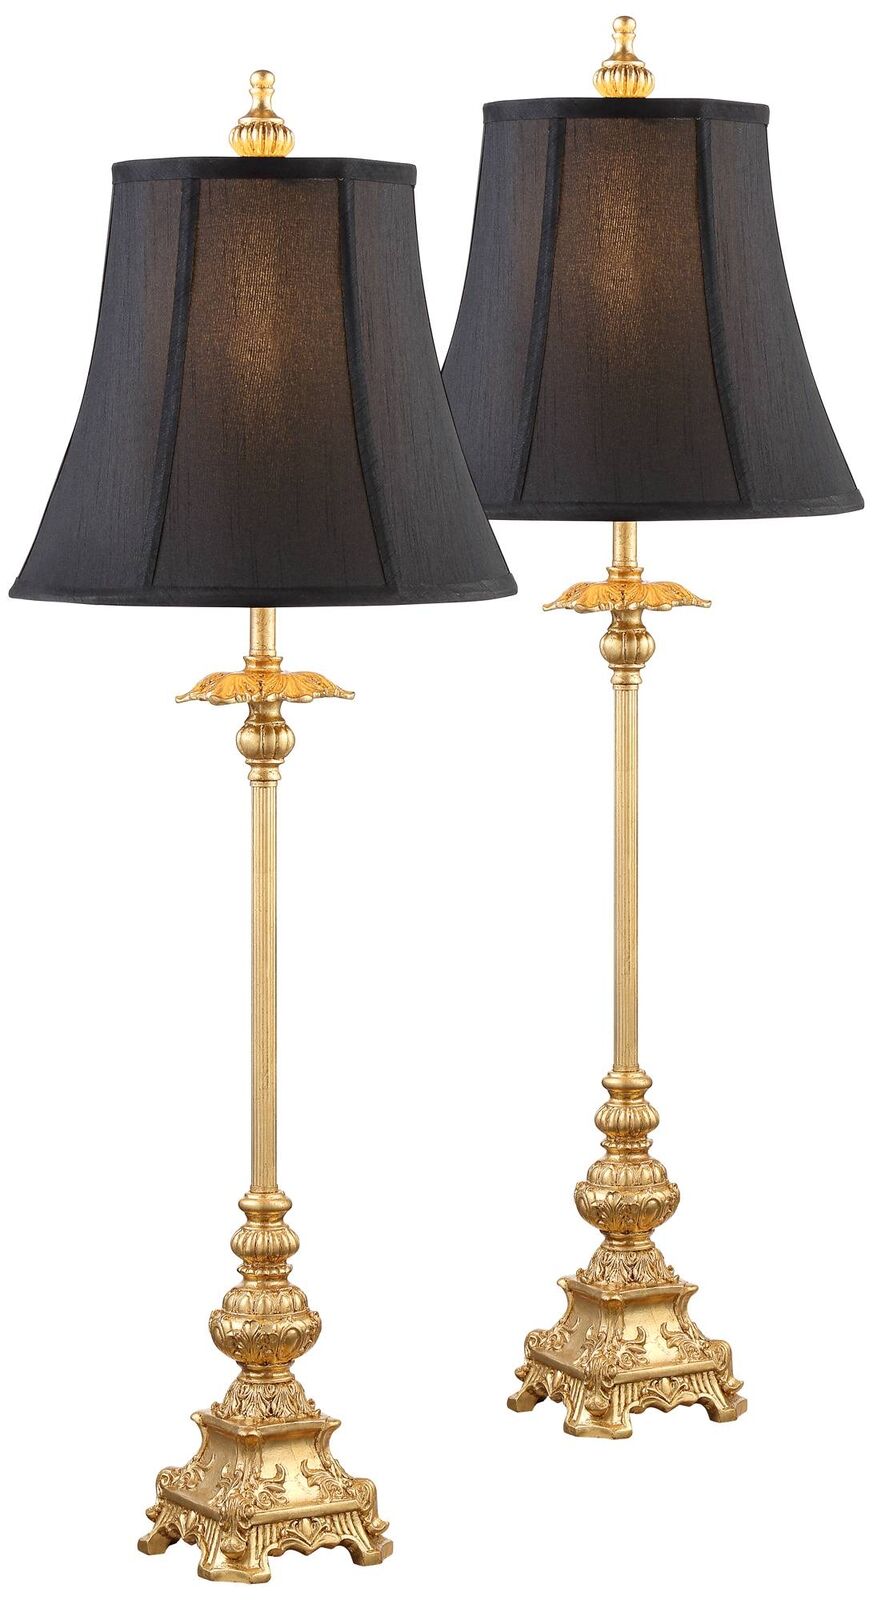 Set of 2 Black Shade Buffet Table Lamps Living Room and Dining Room Decor